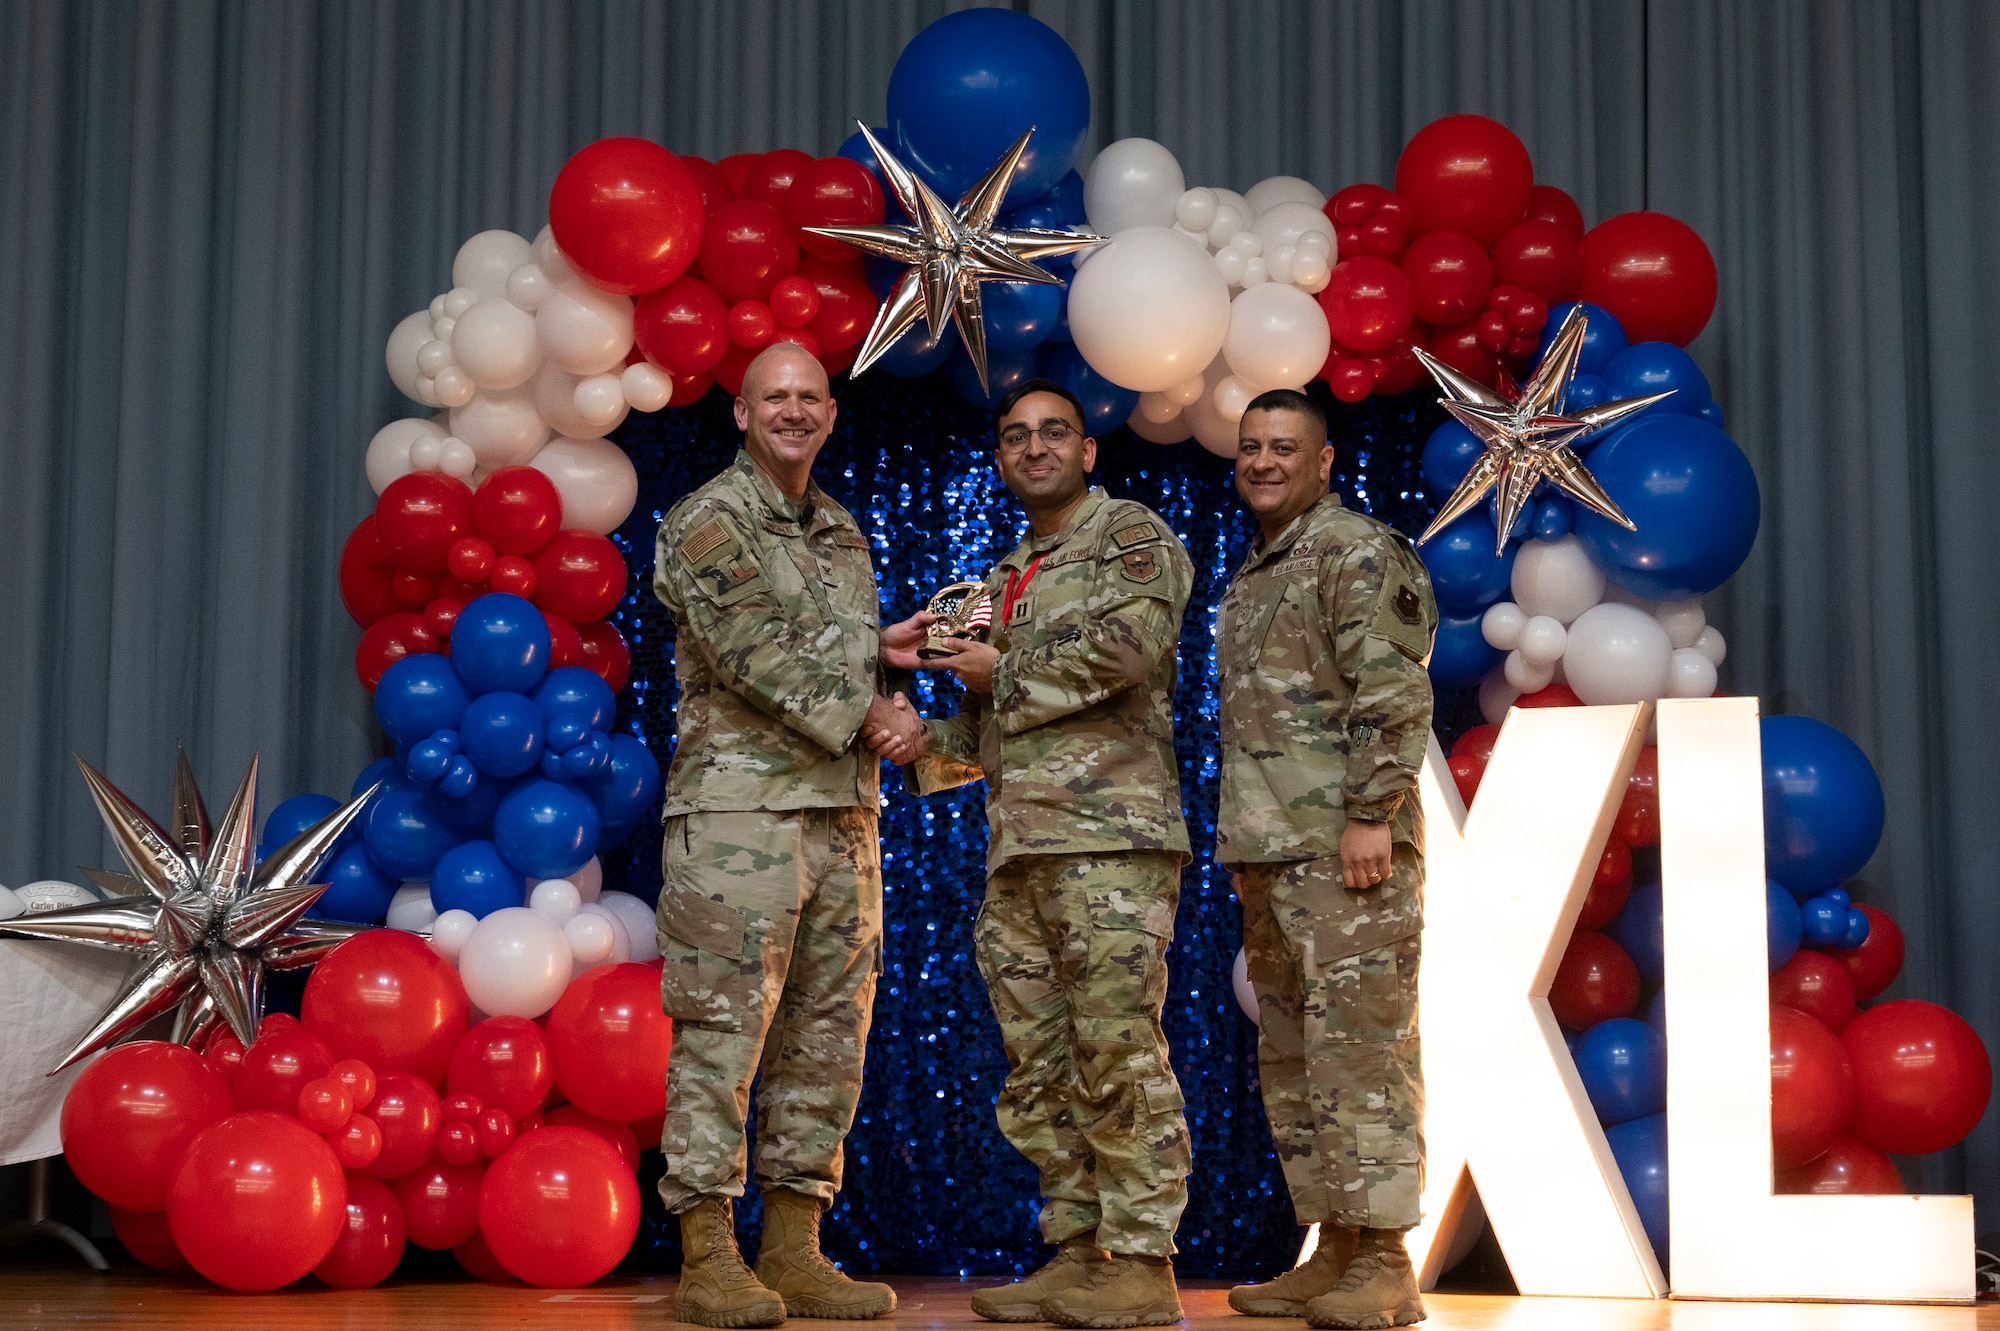 U.S. Air Force Col. Kevin Davidson, 47th Flying Training Wing (FTW) commander, and Chief Master Sgt. Lester Largaespada, 47th FTW command chief, present Capt. Baiwab Subedi, 47th Medical Group, an award during the 2023 47th FTW Annual Awards Ceremony at Laughlin Air Force Base, Texas, Feb. 2, 2024. Annual award winners were selected based on their technical expertise, demonstration of leadership and job performance. (U.S. Air Force photo by Senior Airman Kailee Reynolds)